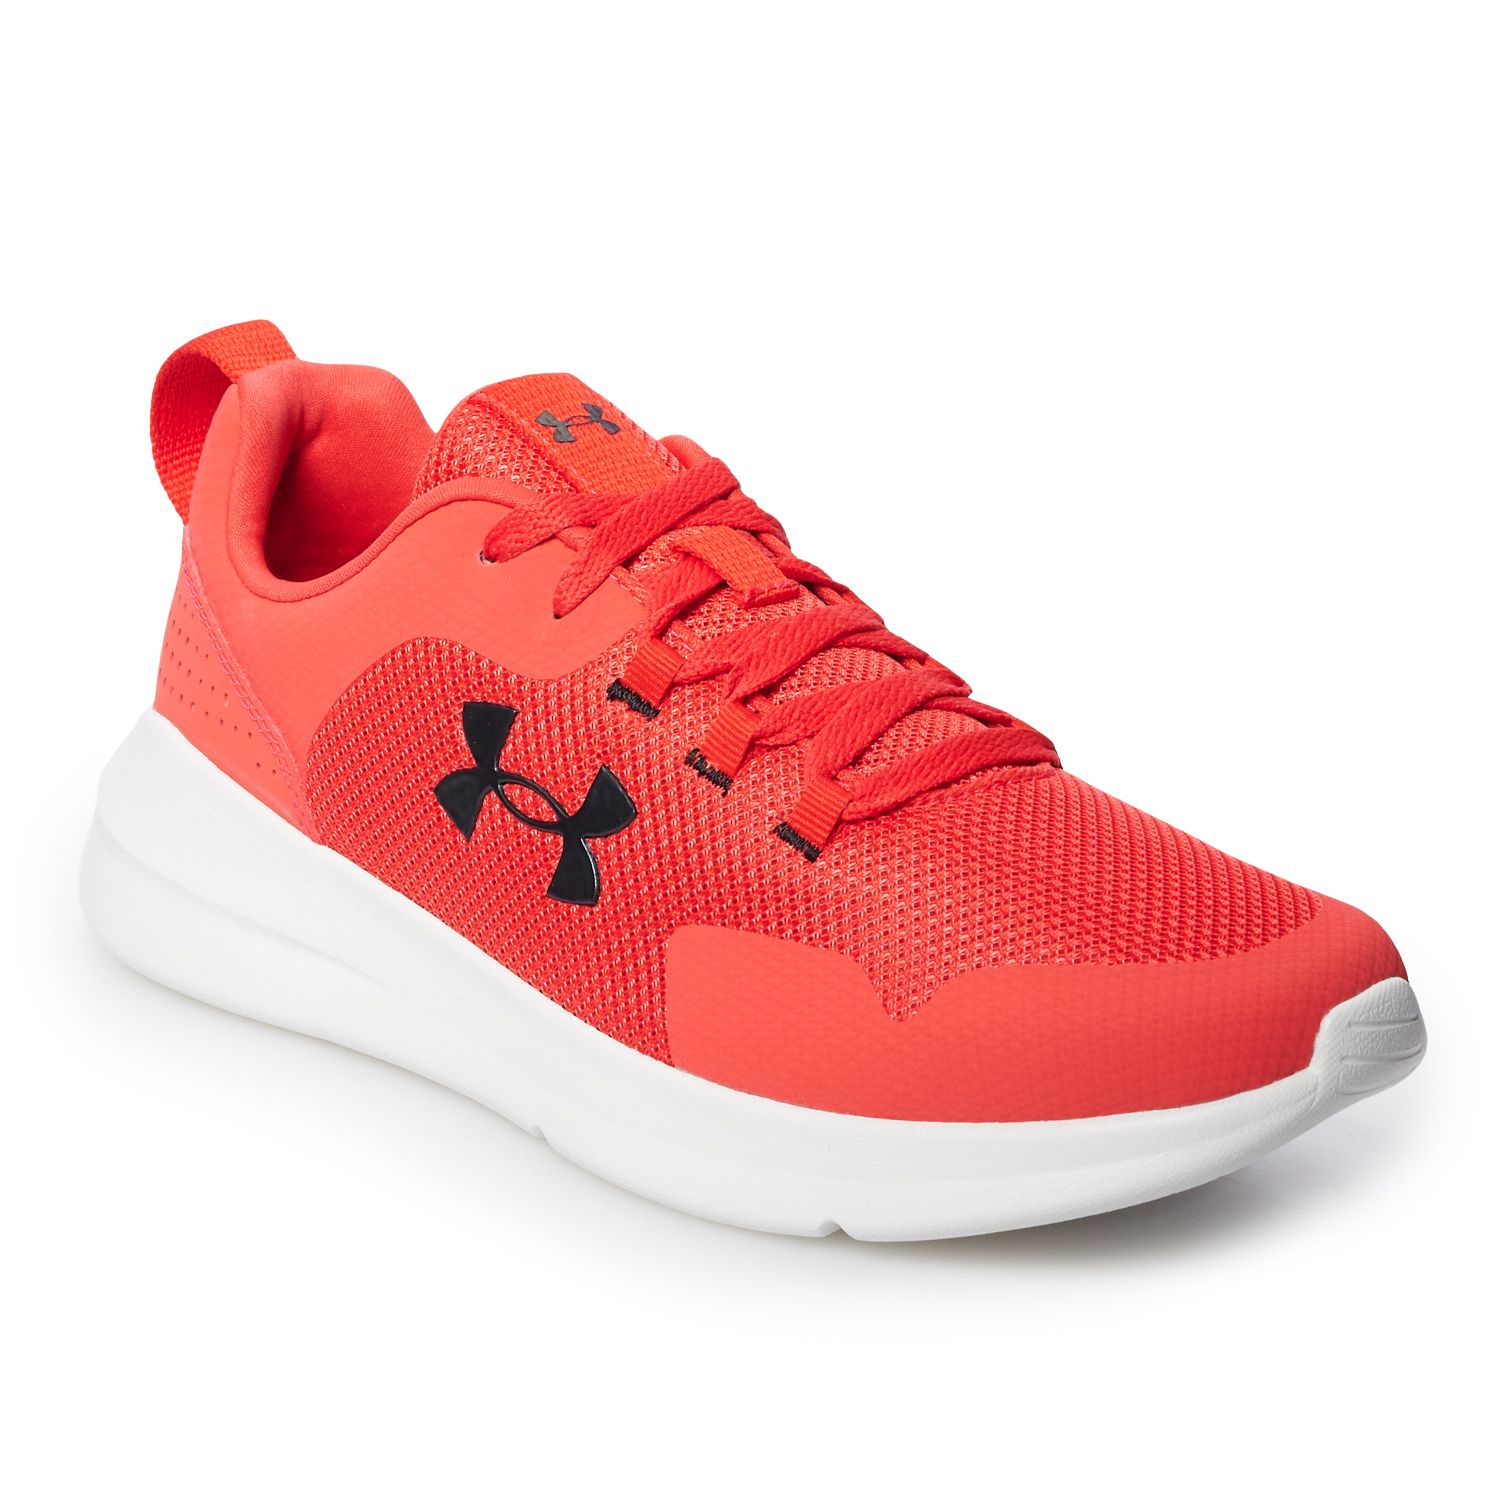 under armour shoes at kohls